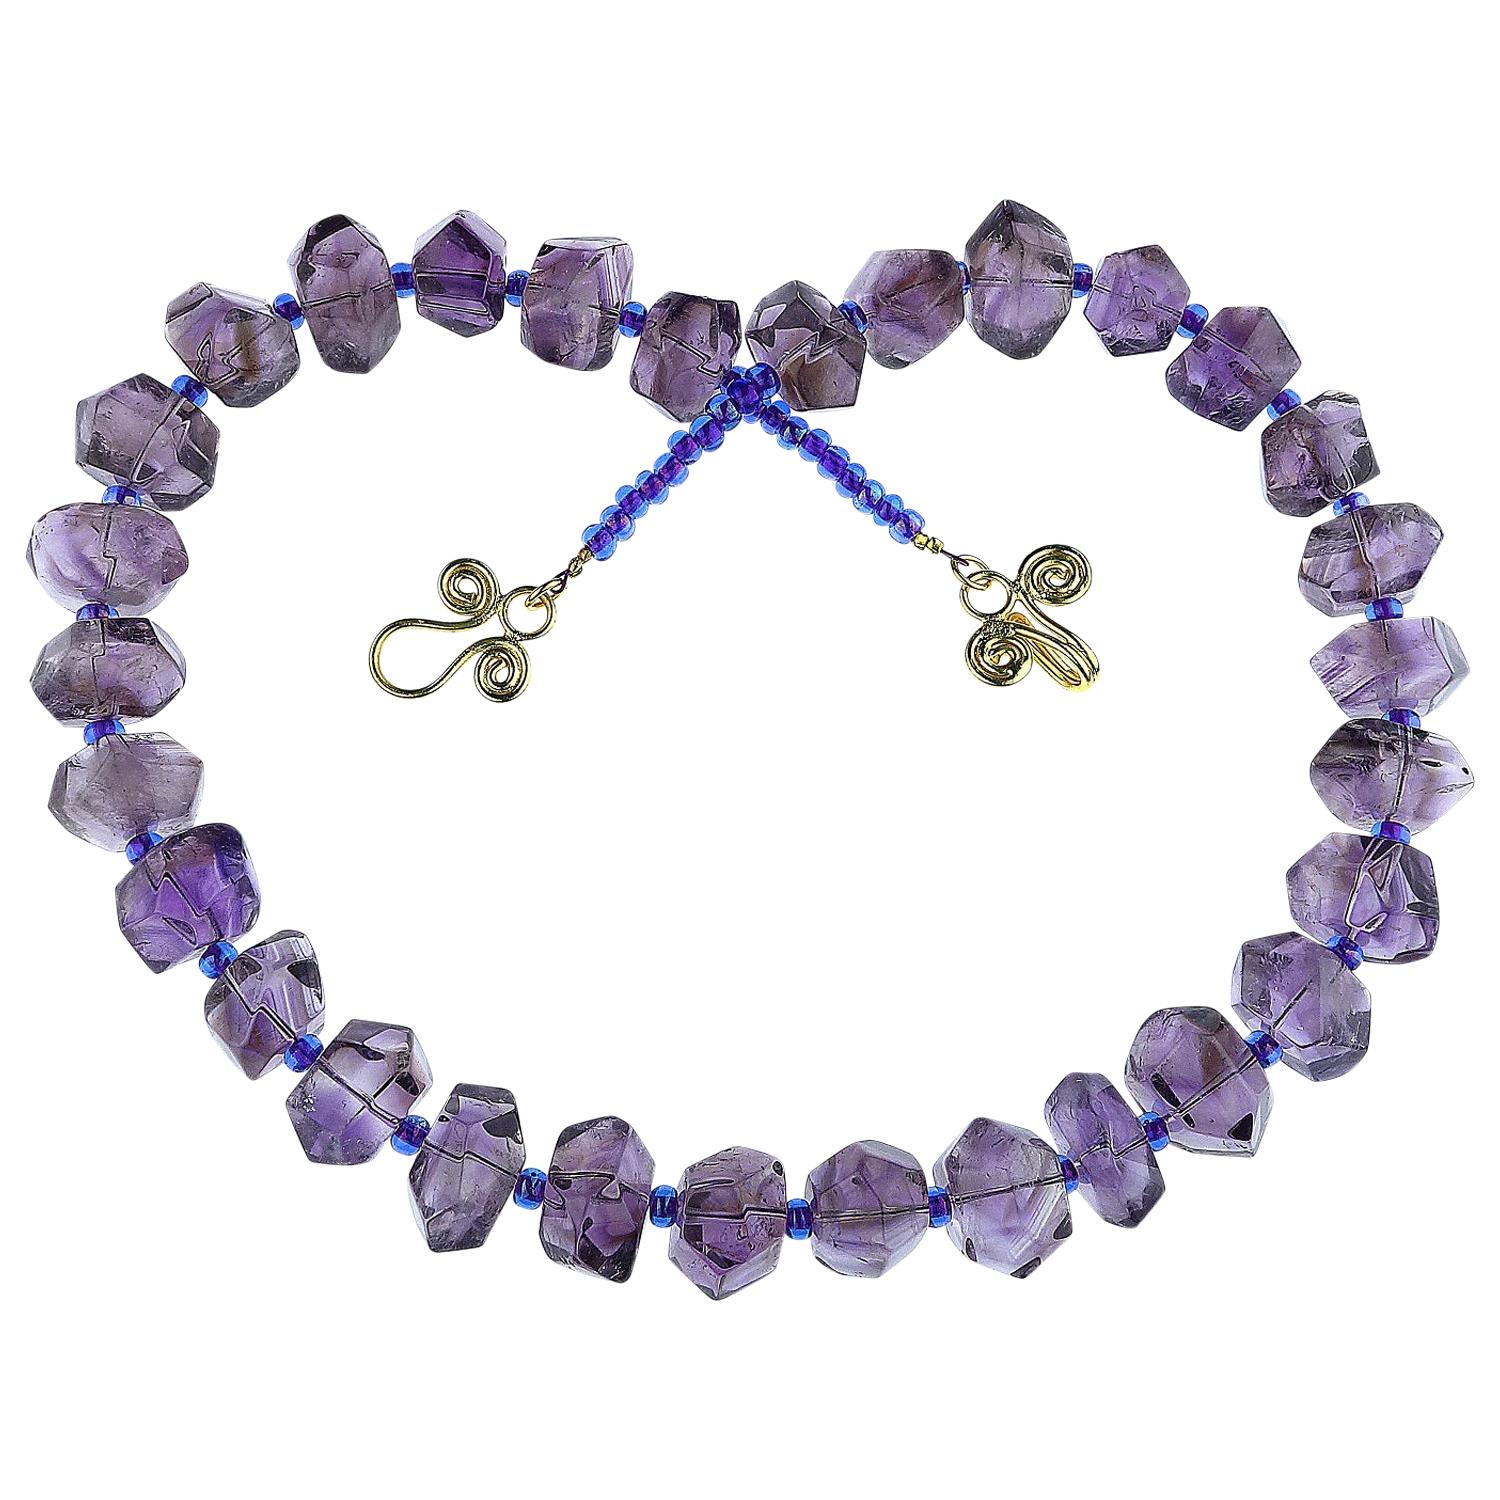 Highly polished chunks of medium tone Amethyst accented with sparkling Czech purple beads necklace. This necklace is finished with a scrolly 18K gold plated clasp. It is fun and funky. This Amethyst necklace, the February birthstone, will enhance